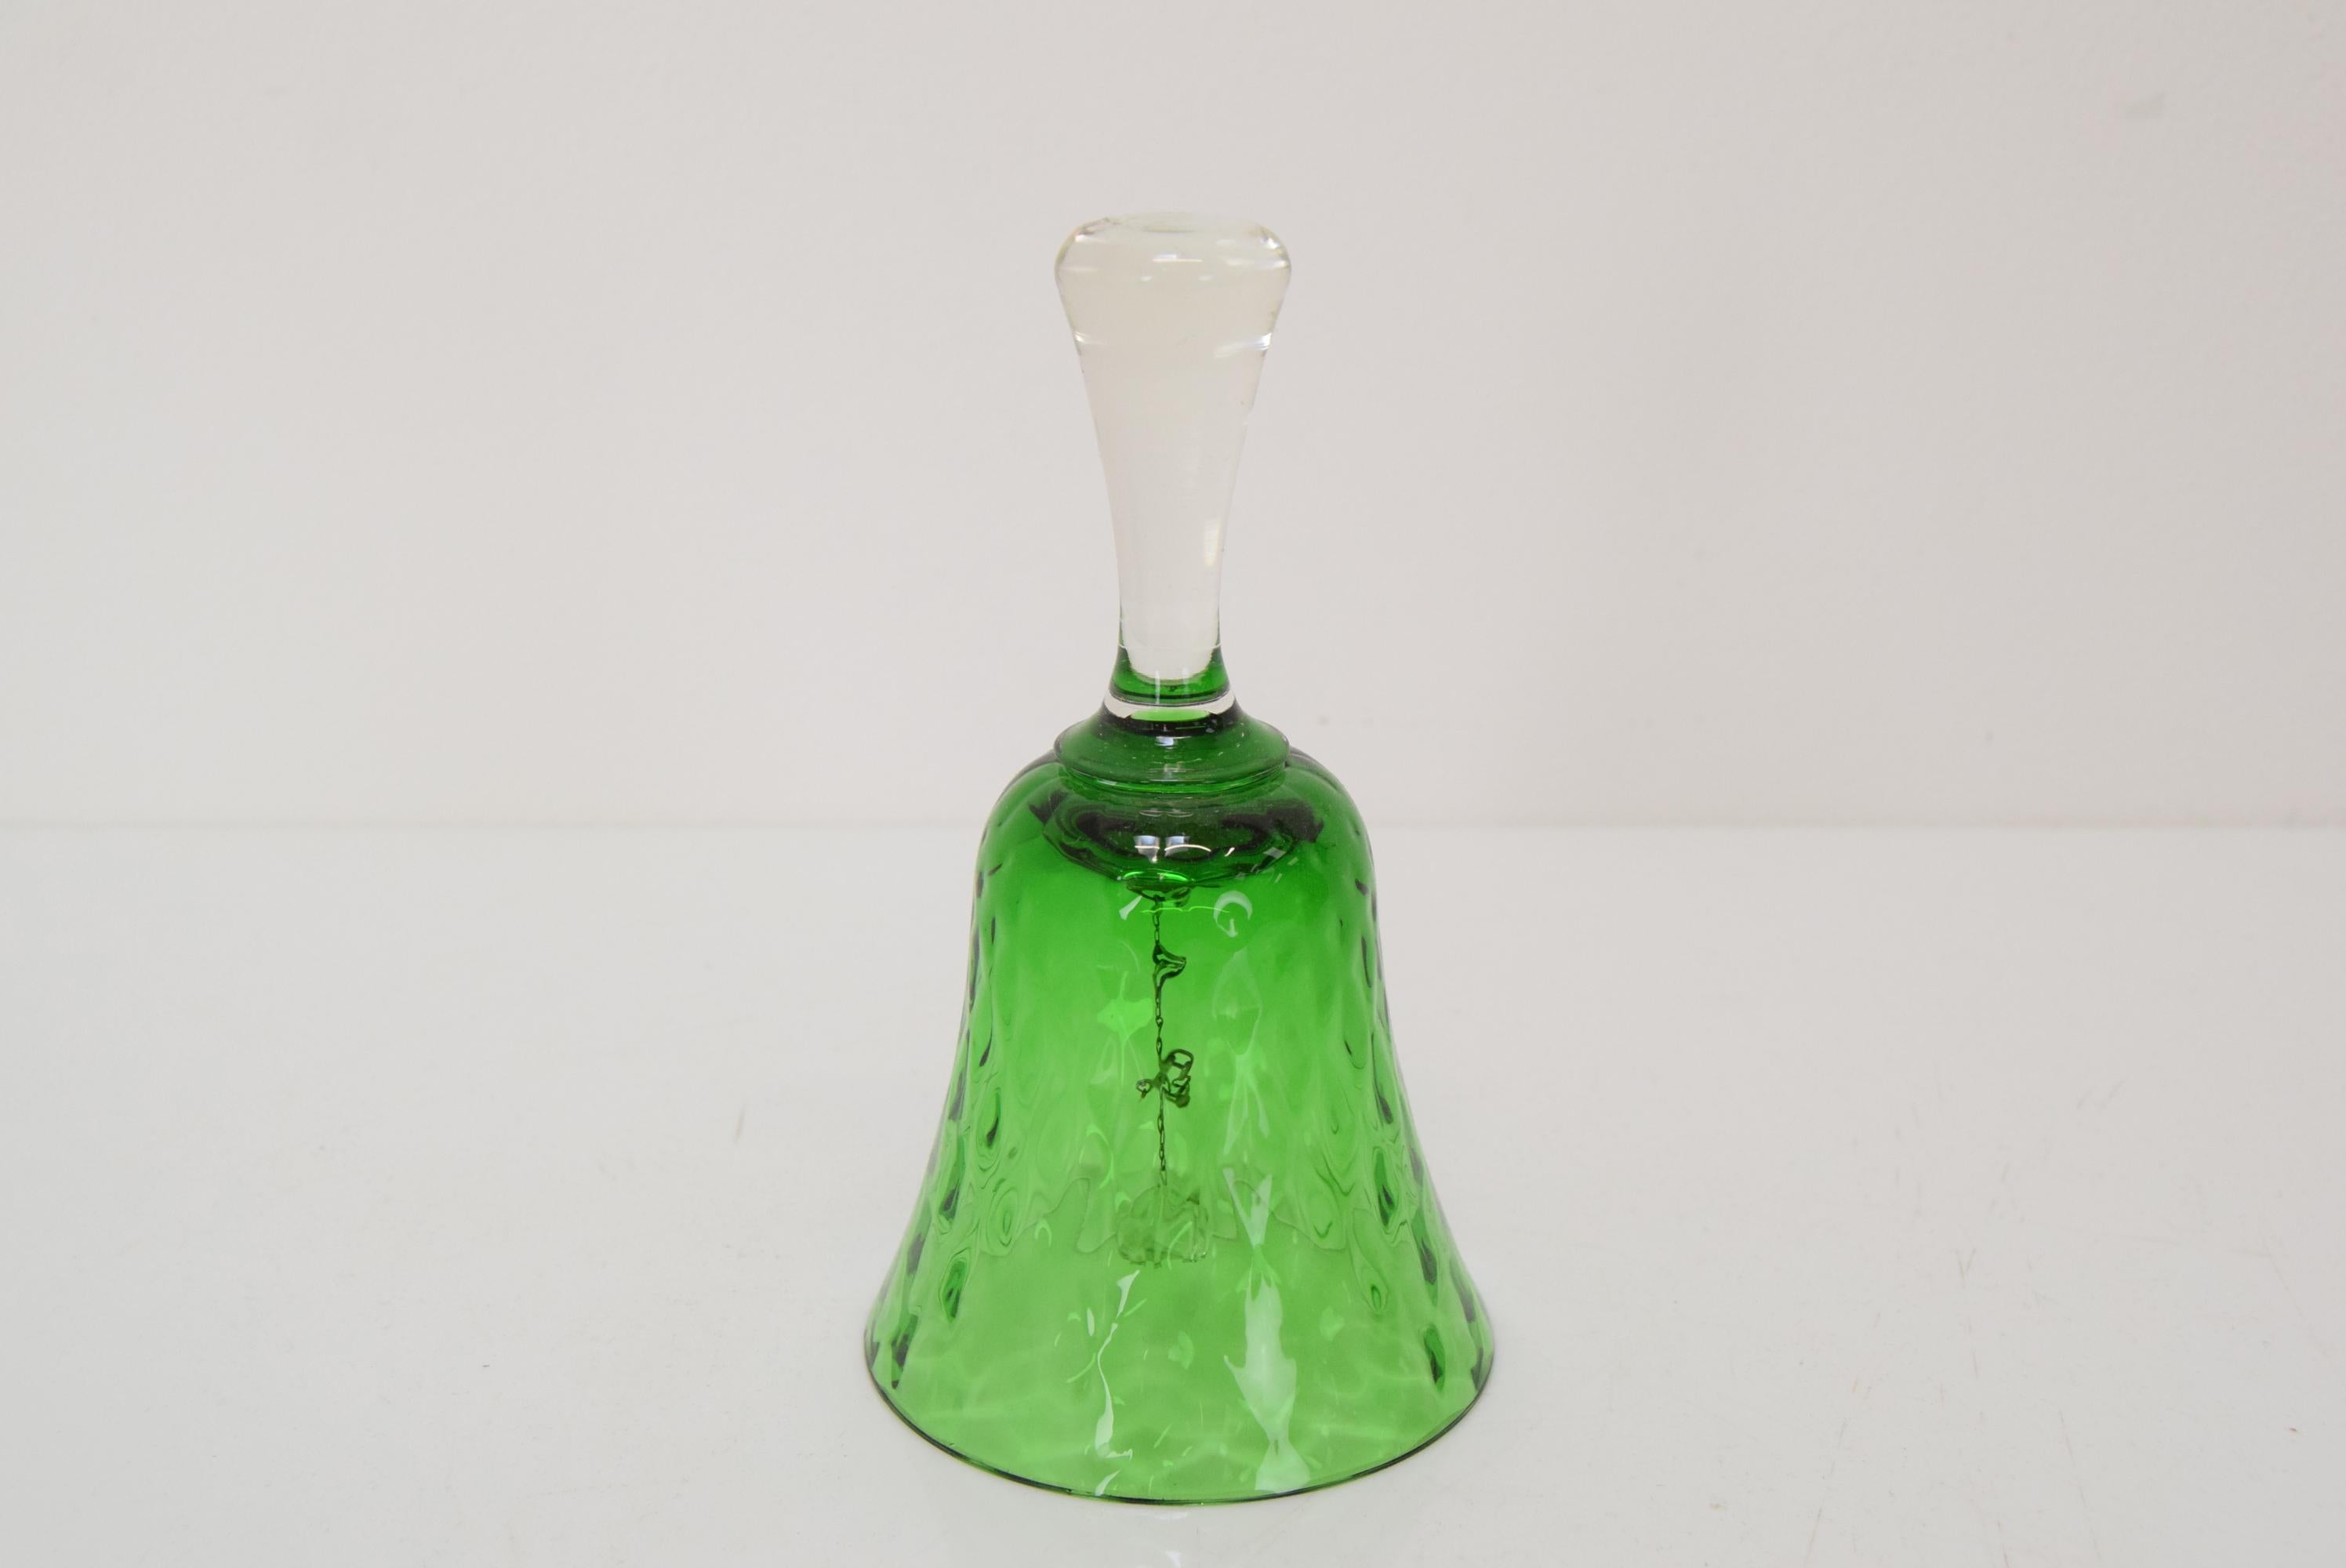 
Made in Czechoslovakia
Made of Art Glass,Metal
Hand Made
Re-polished
Good Original Condition

